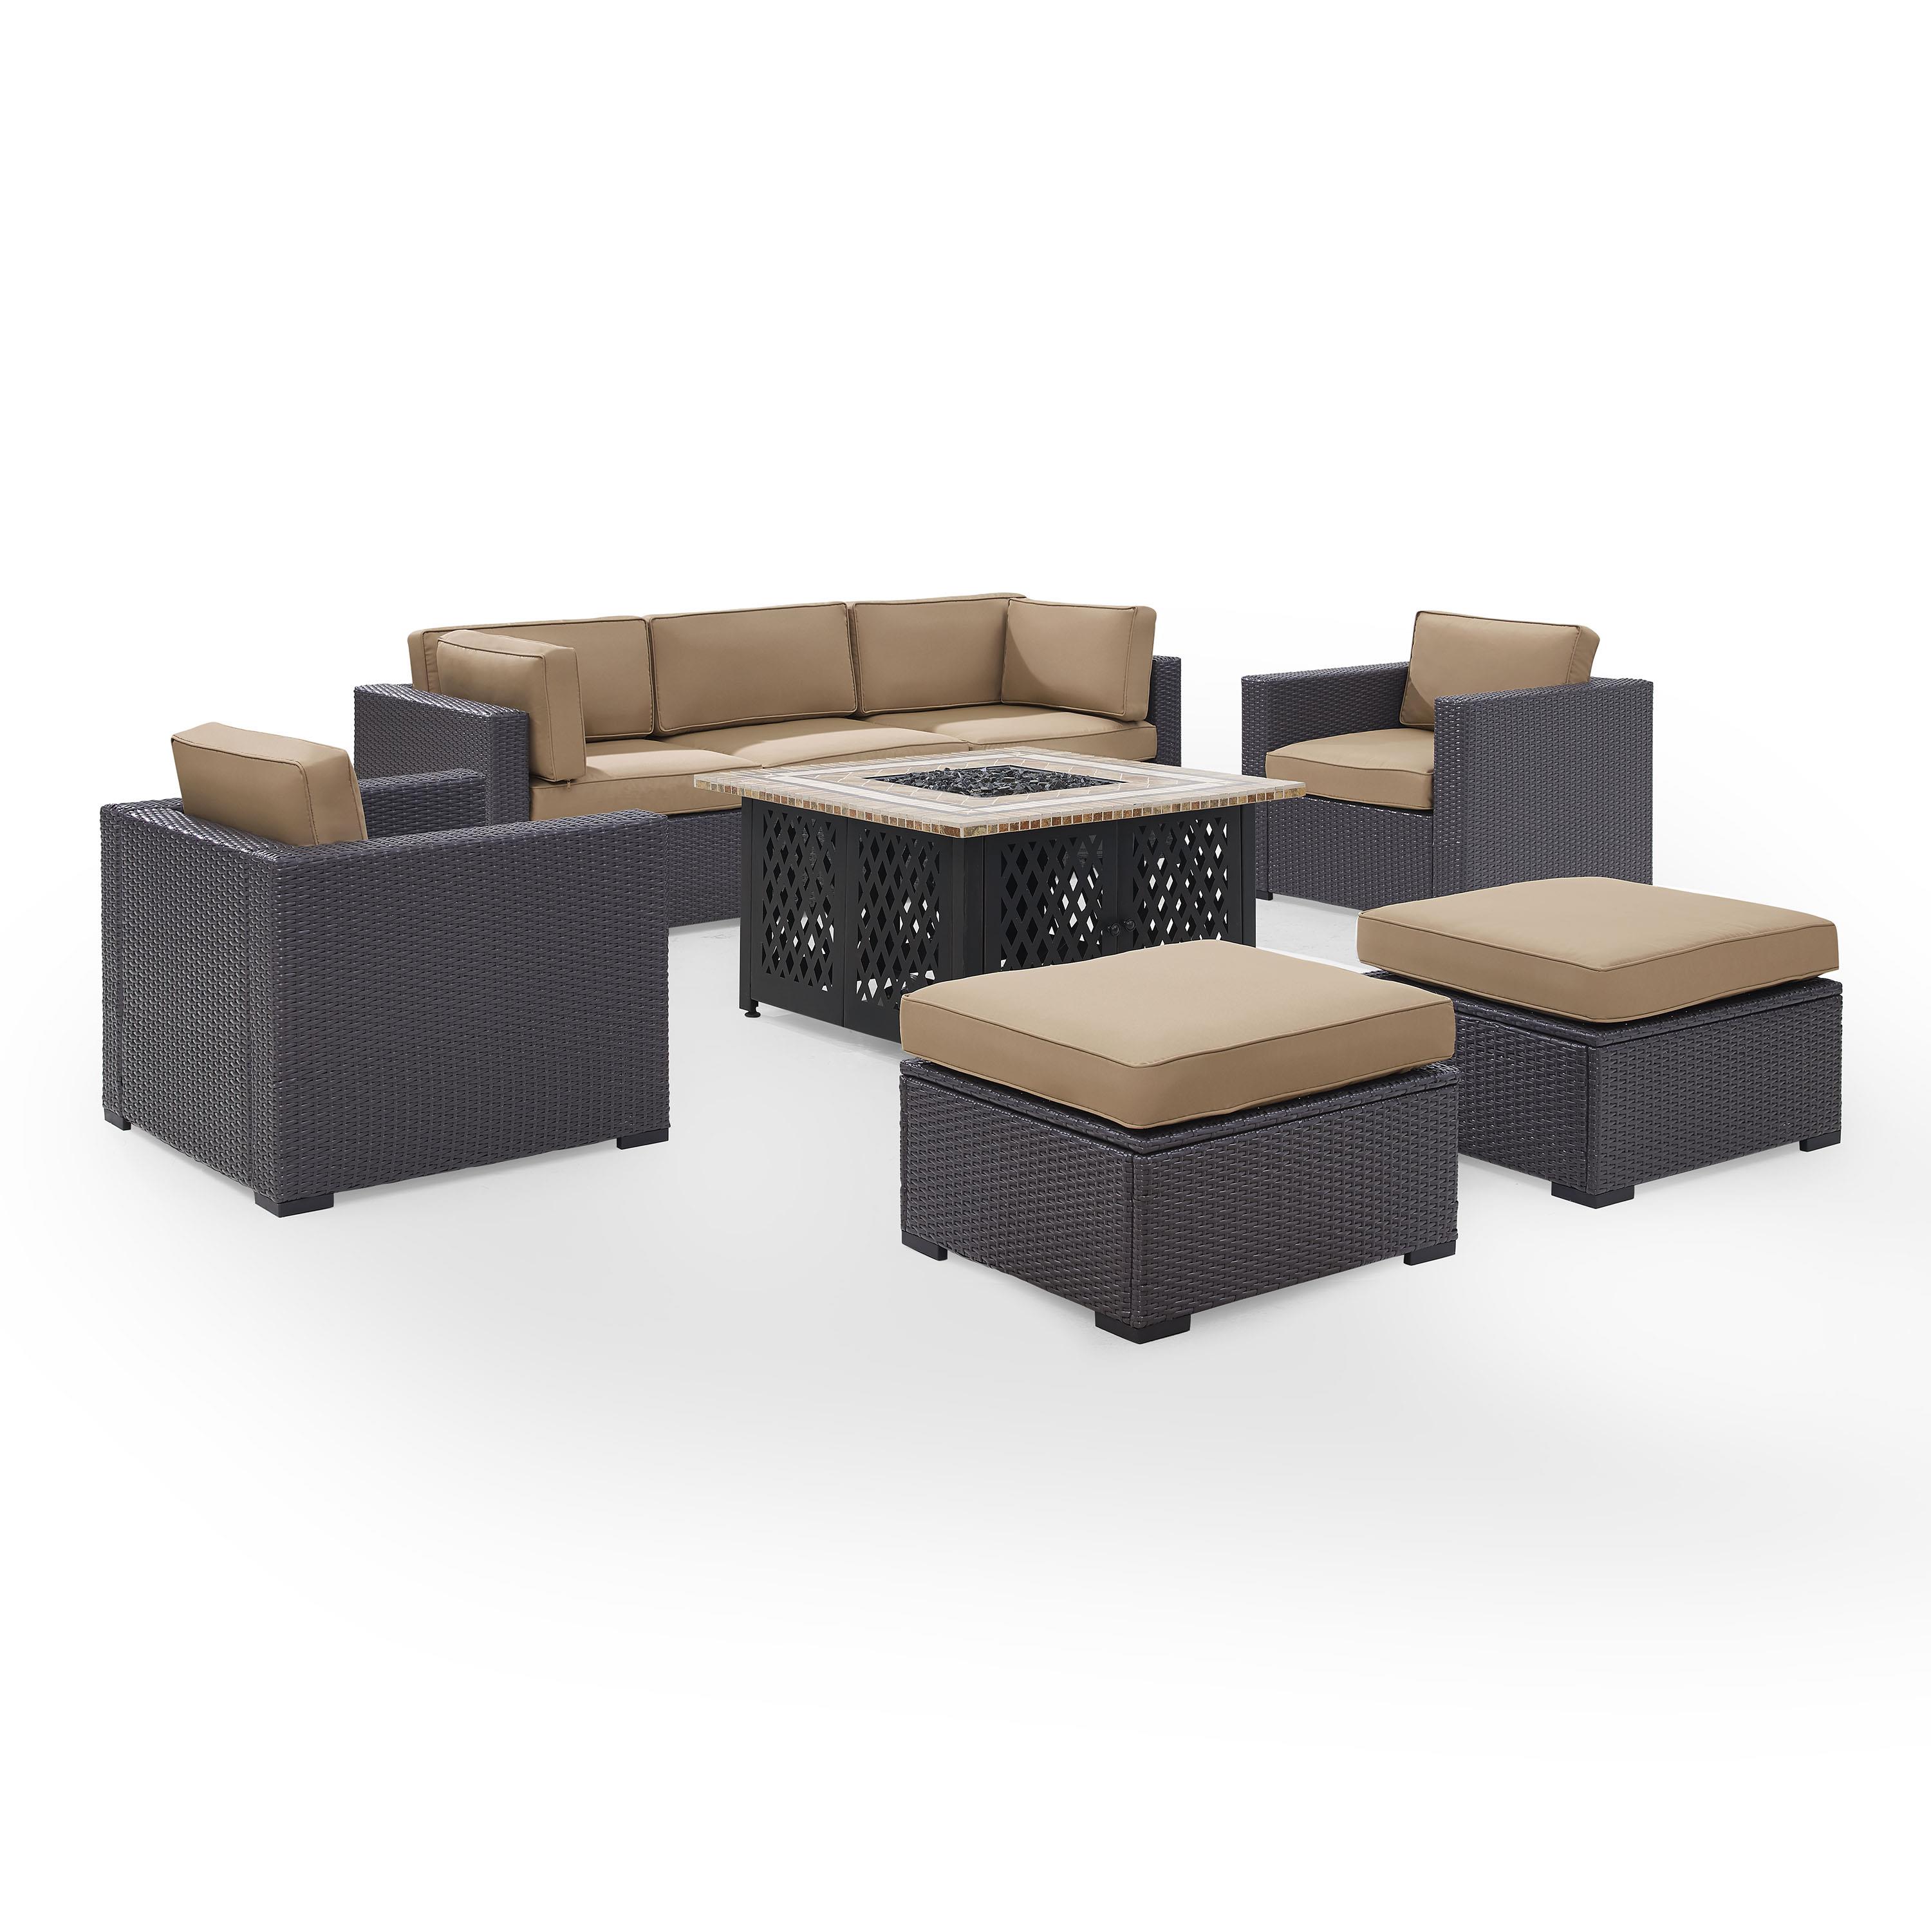 Crosley Furniture Biscayne 7 Piece Metal Patio Fire Pit Sofa Set in Brown/Mocha - image 2 of 4